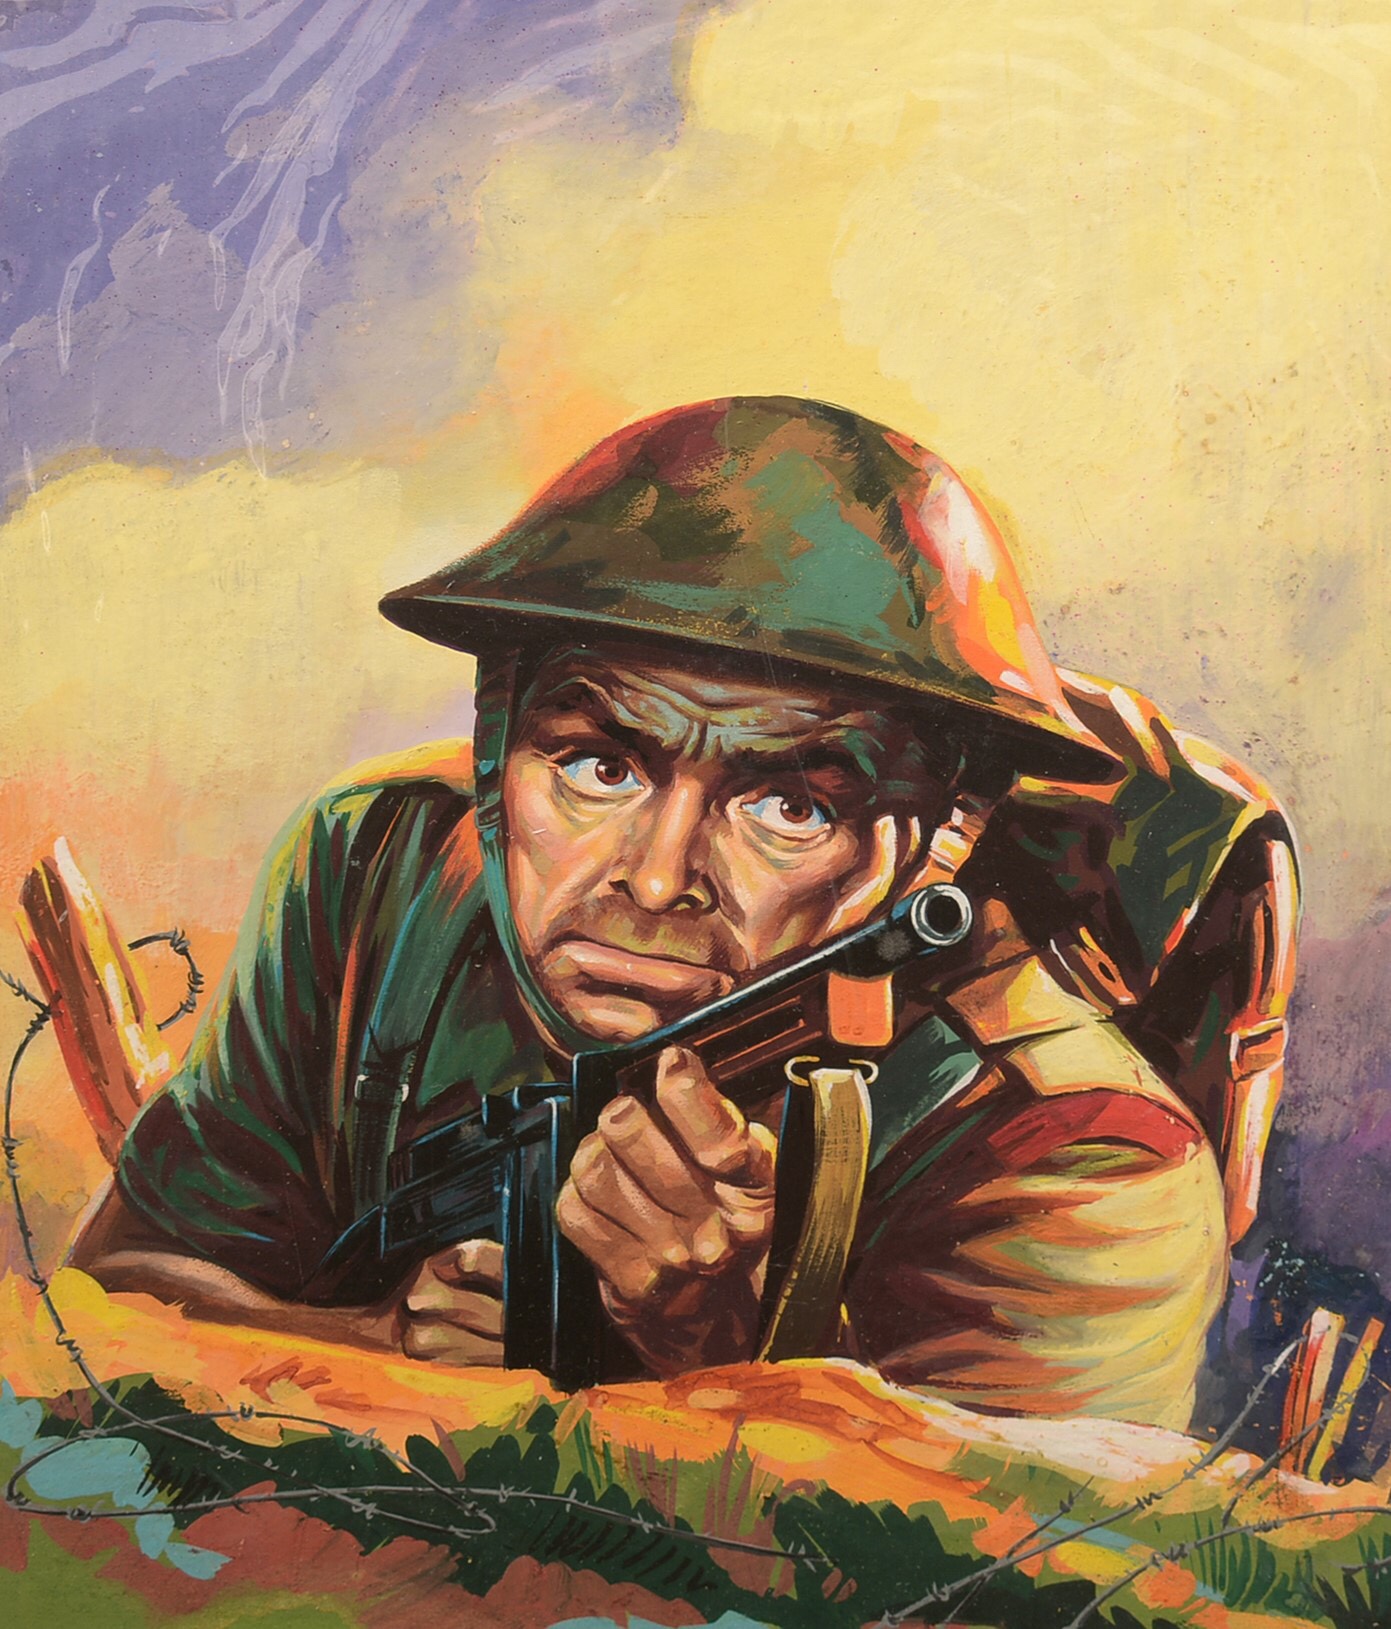 Original Art Work for the front cover of War Picture Library, No. 142 'The Scent of Danger', by Henry Fox, gouache on board, image size 37 x 28cms